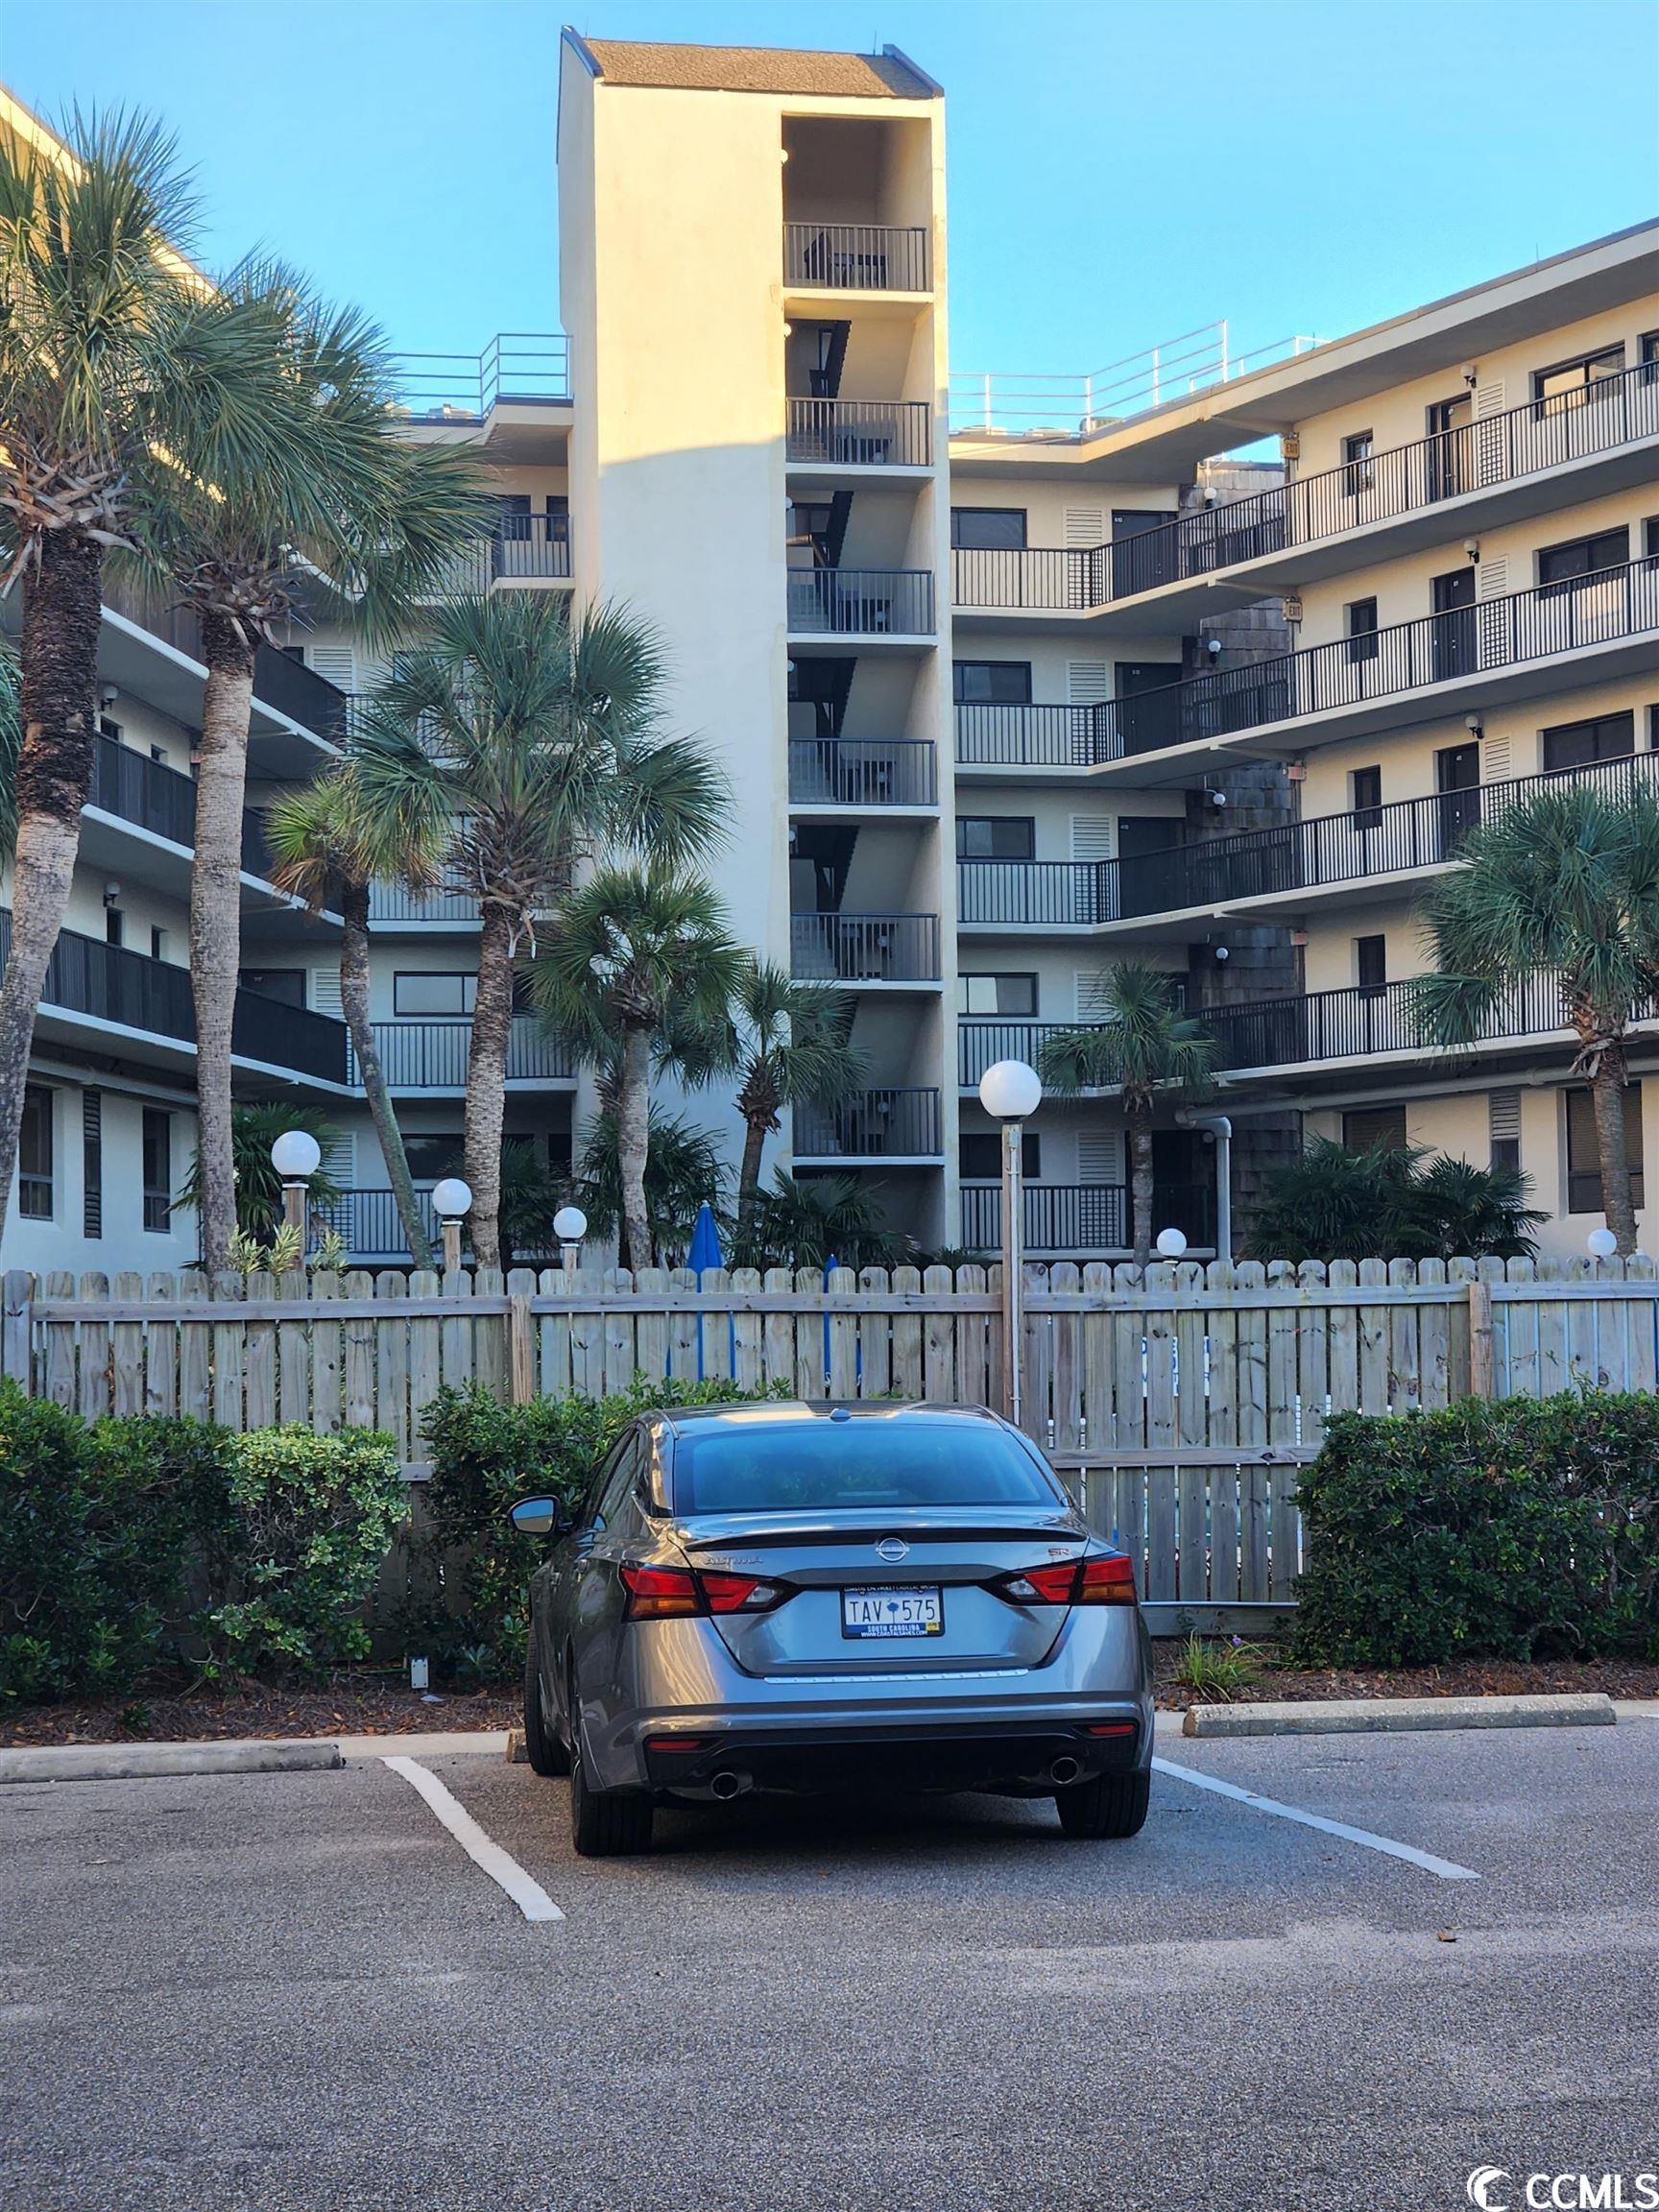 welcome to north litchfield beach! this 2-bedroom 1.5 bath condo is across the street from the beach. a very clean condo used as a second home. beach access is across the street which features handicapped access onto the beach. there is a large pool and grills and seating for a nice relaxing evening outside. there is a new washer/dryer installed on each floor. no pets are allowed.  come make this your vacation home, primary home or rental. litchfield retreat are the only condos on n. litchfield beach. easy access to shopping, golfing, great restaurants, historic georgetown and you are 20 minutes from myrtle beach and airport.